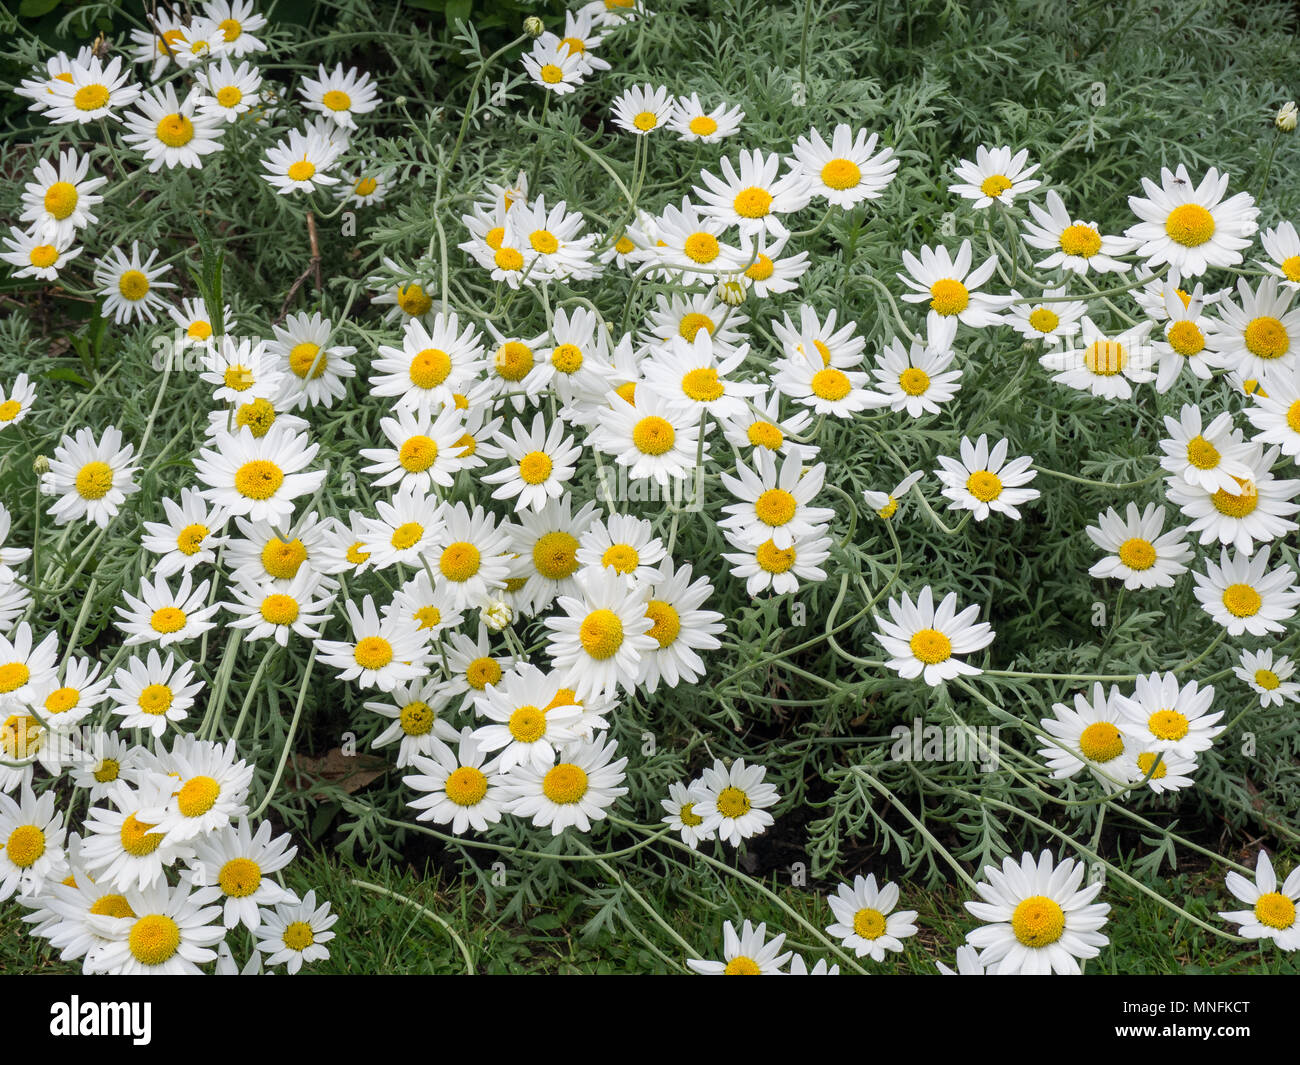 The white daisy flowers and silver foliage of Anthemis punctata cupaniana Stock Photo